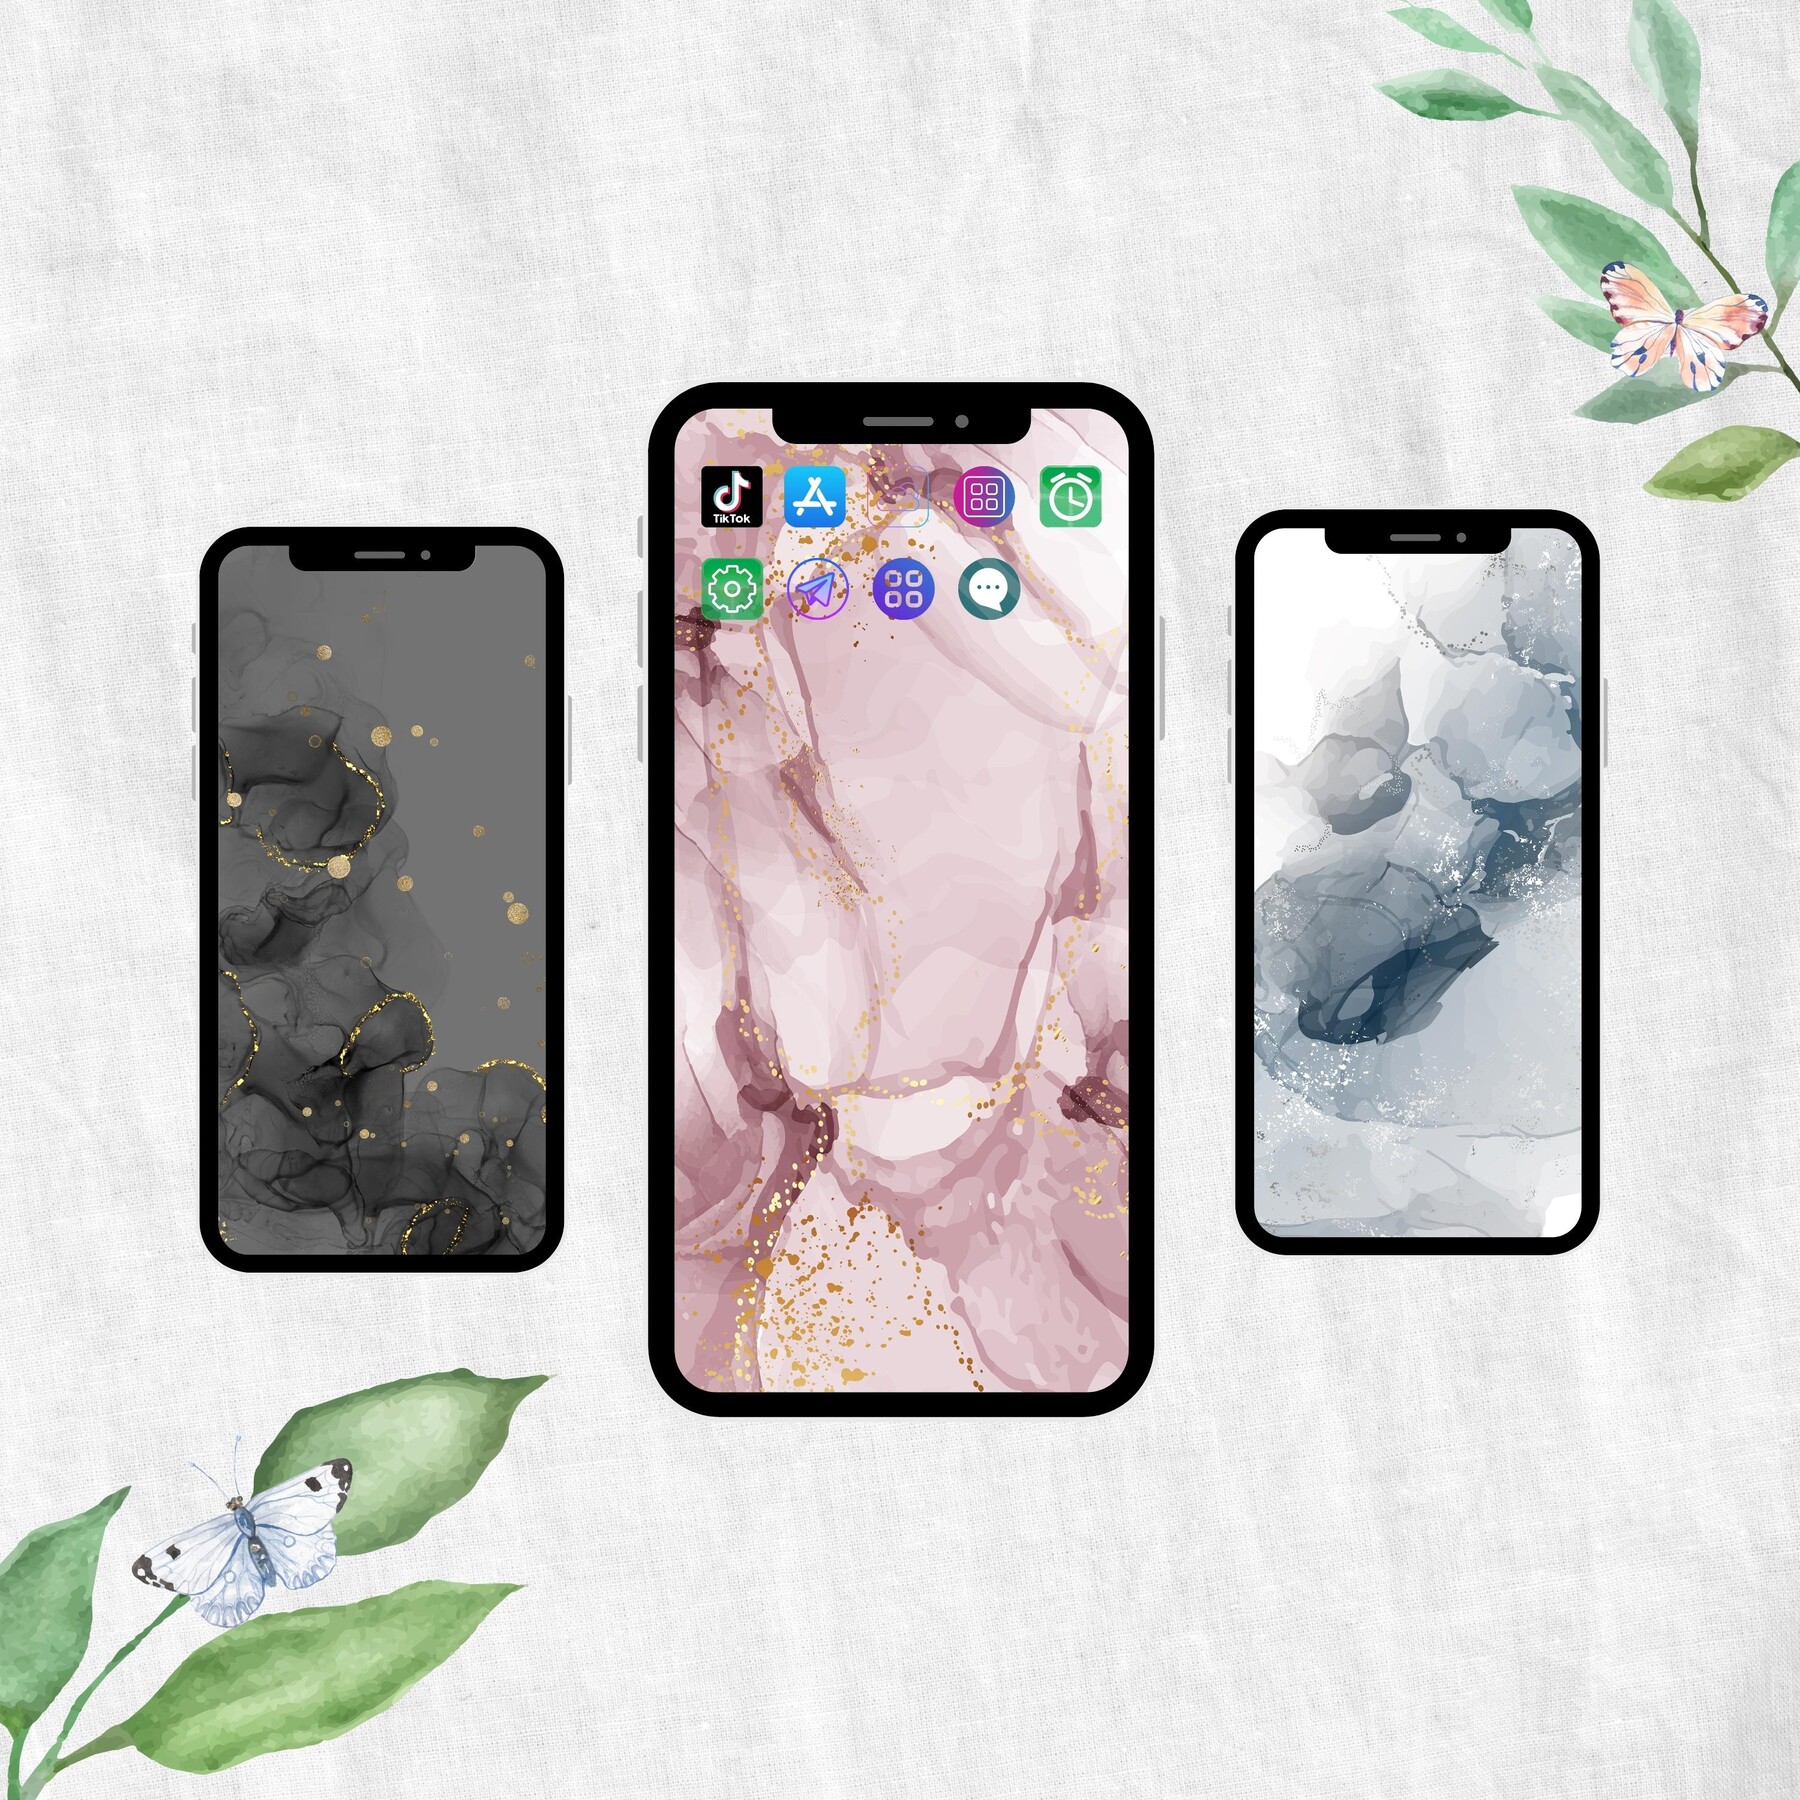 Download the new iPhone 11 Pro stock wallpapers - iGeeksBlog